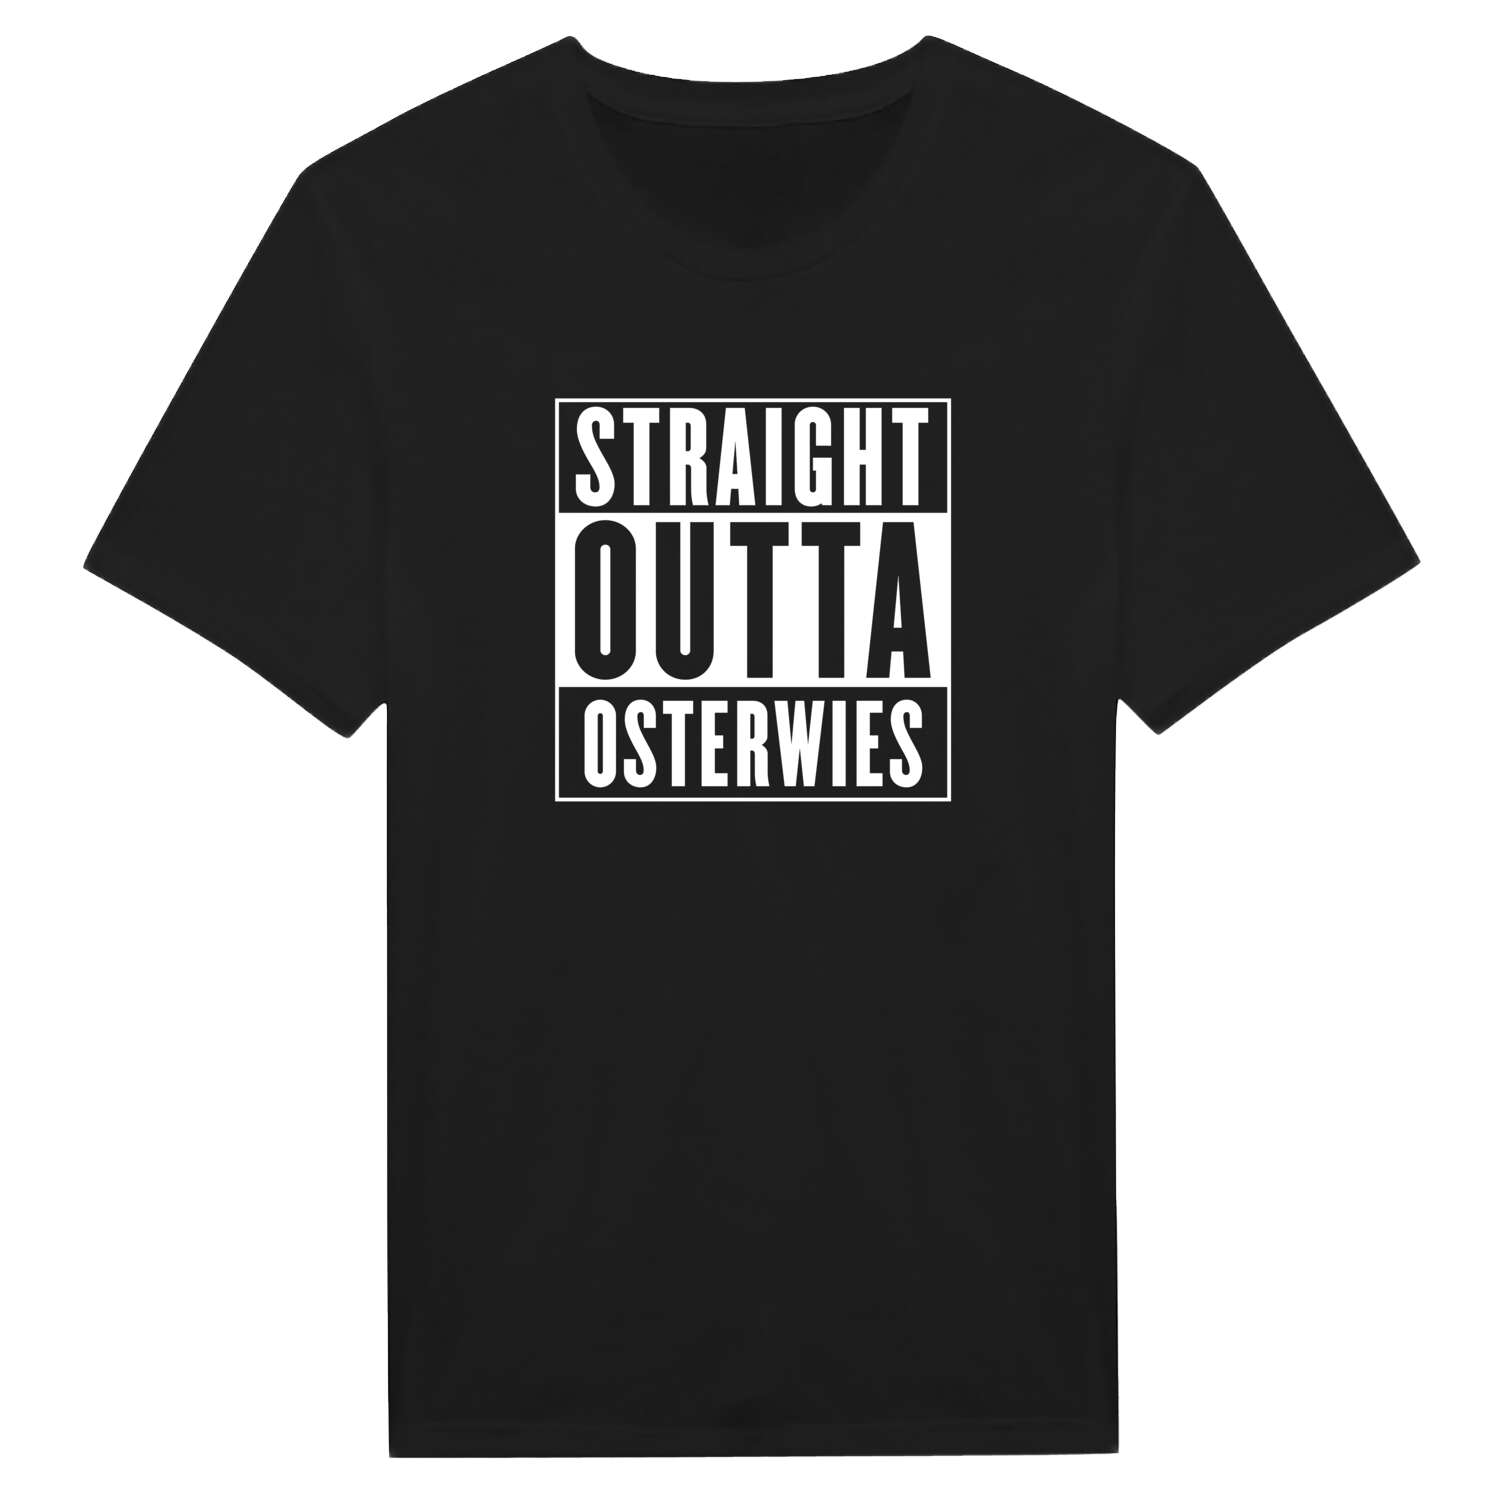 Osterwies T-Shirt »Straight Outta«